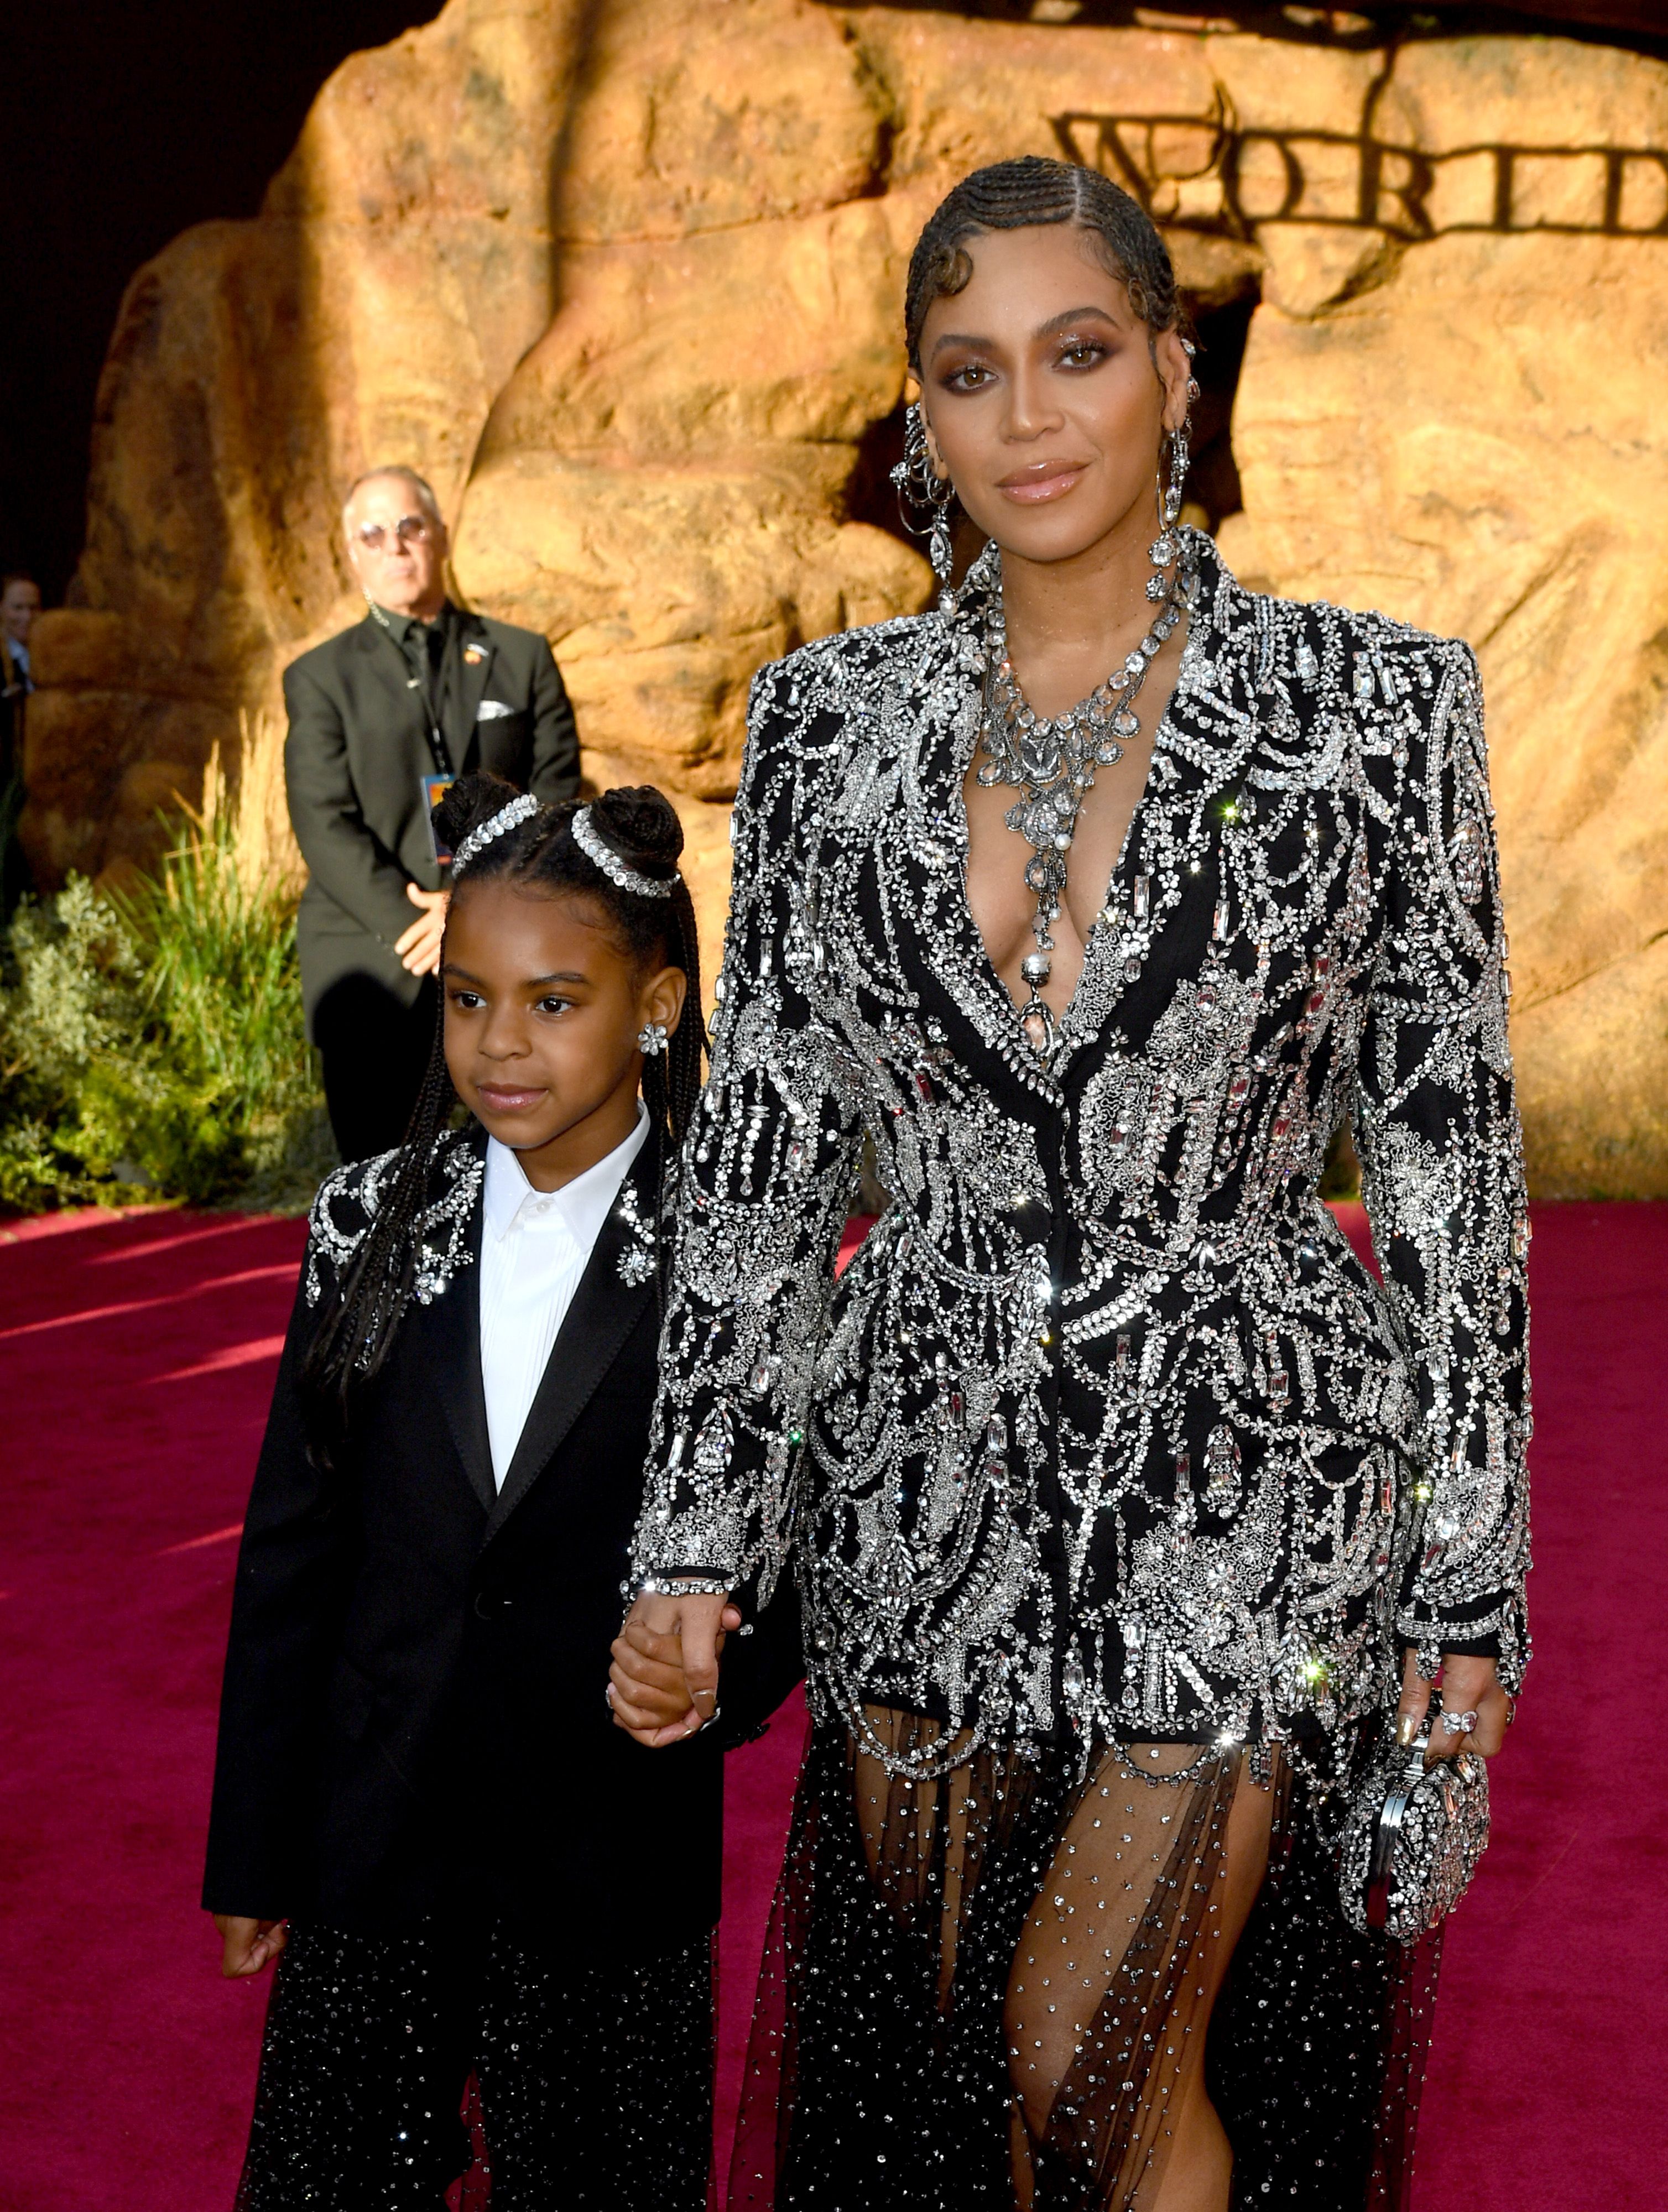 Blue Ivy Carter and Beyoncé during Disney's "The Lion King" premiere at Dolby Theatre on July 9, 2019, in Hollywood, California. | Source: Getty Images